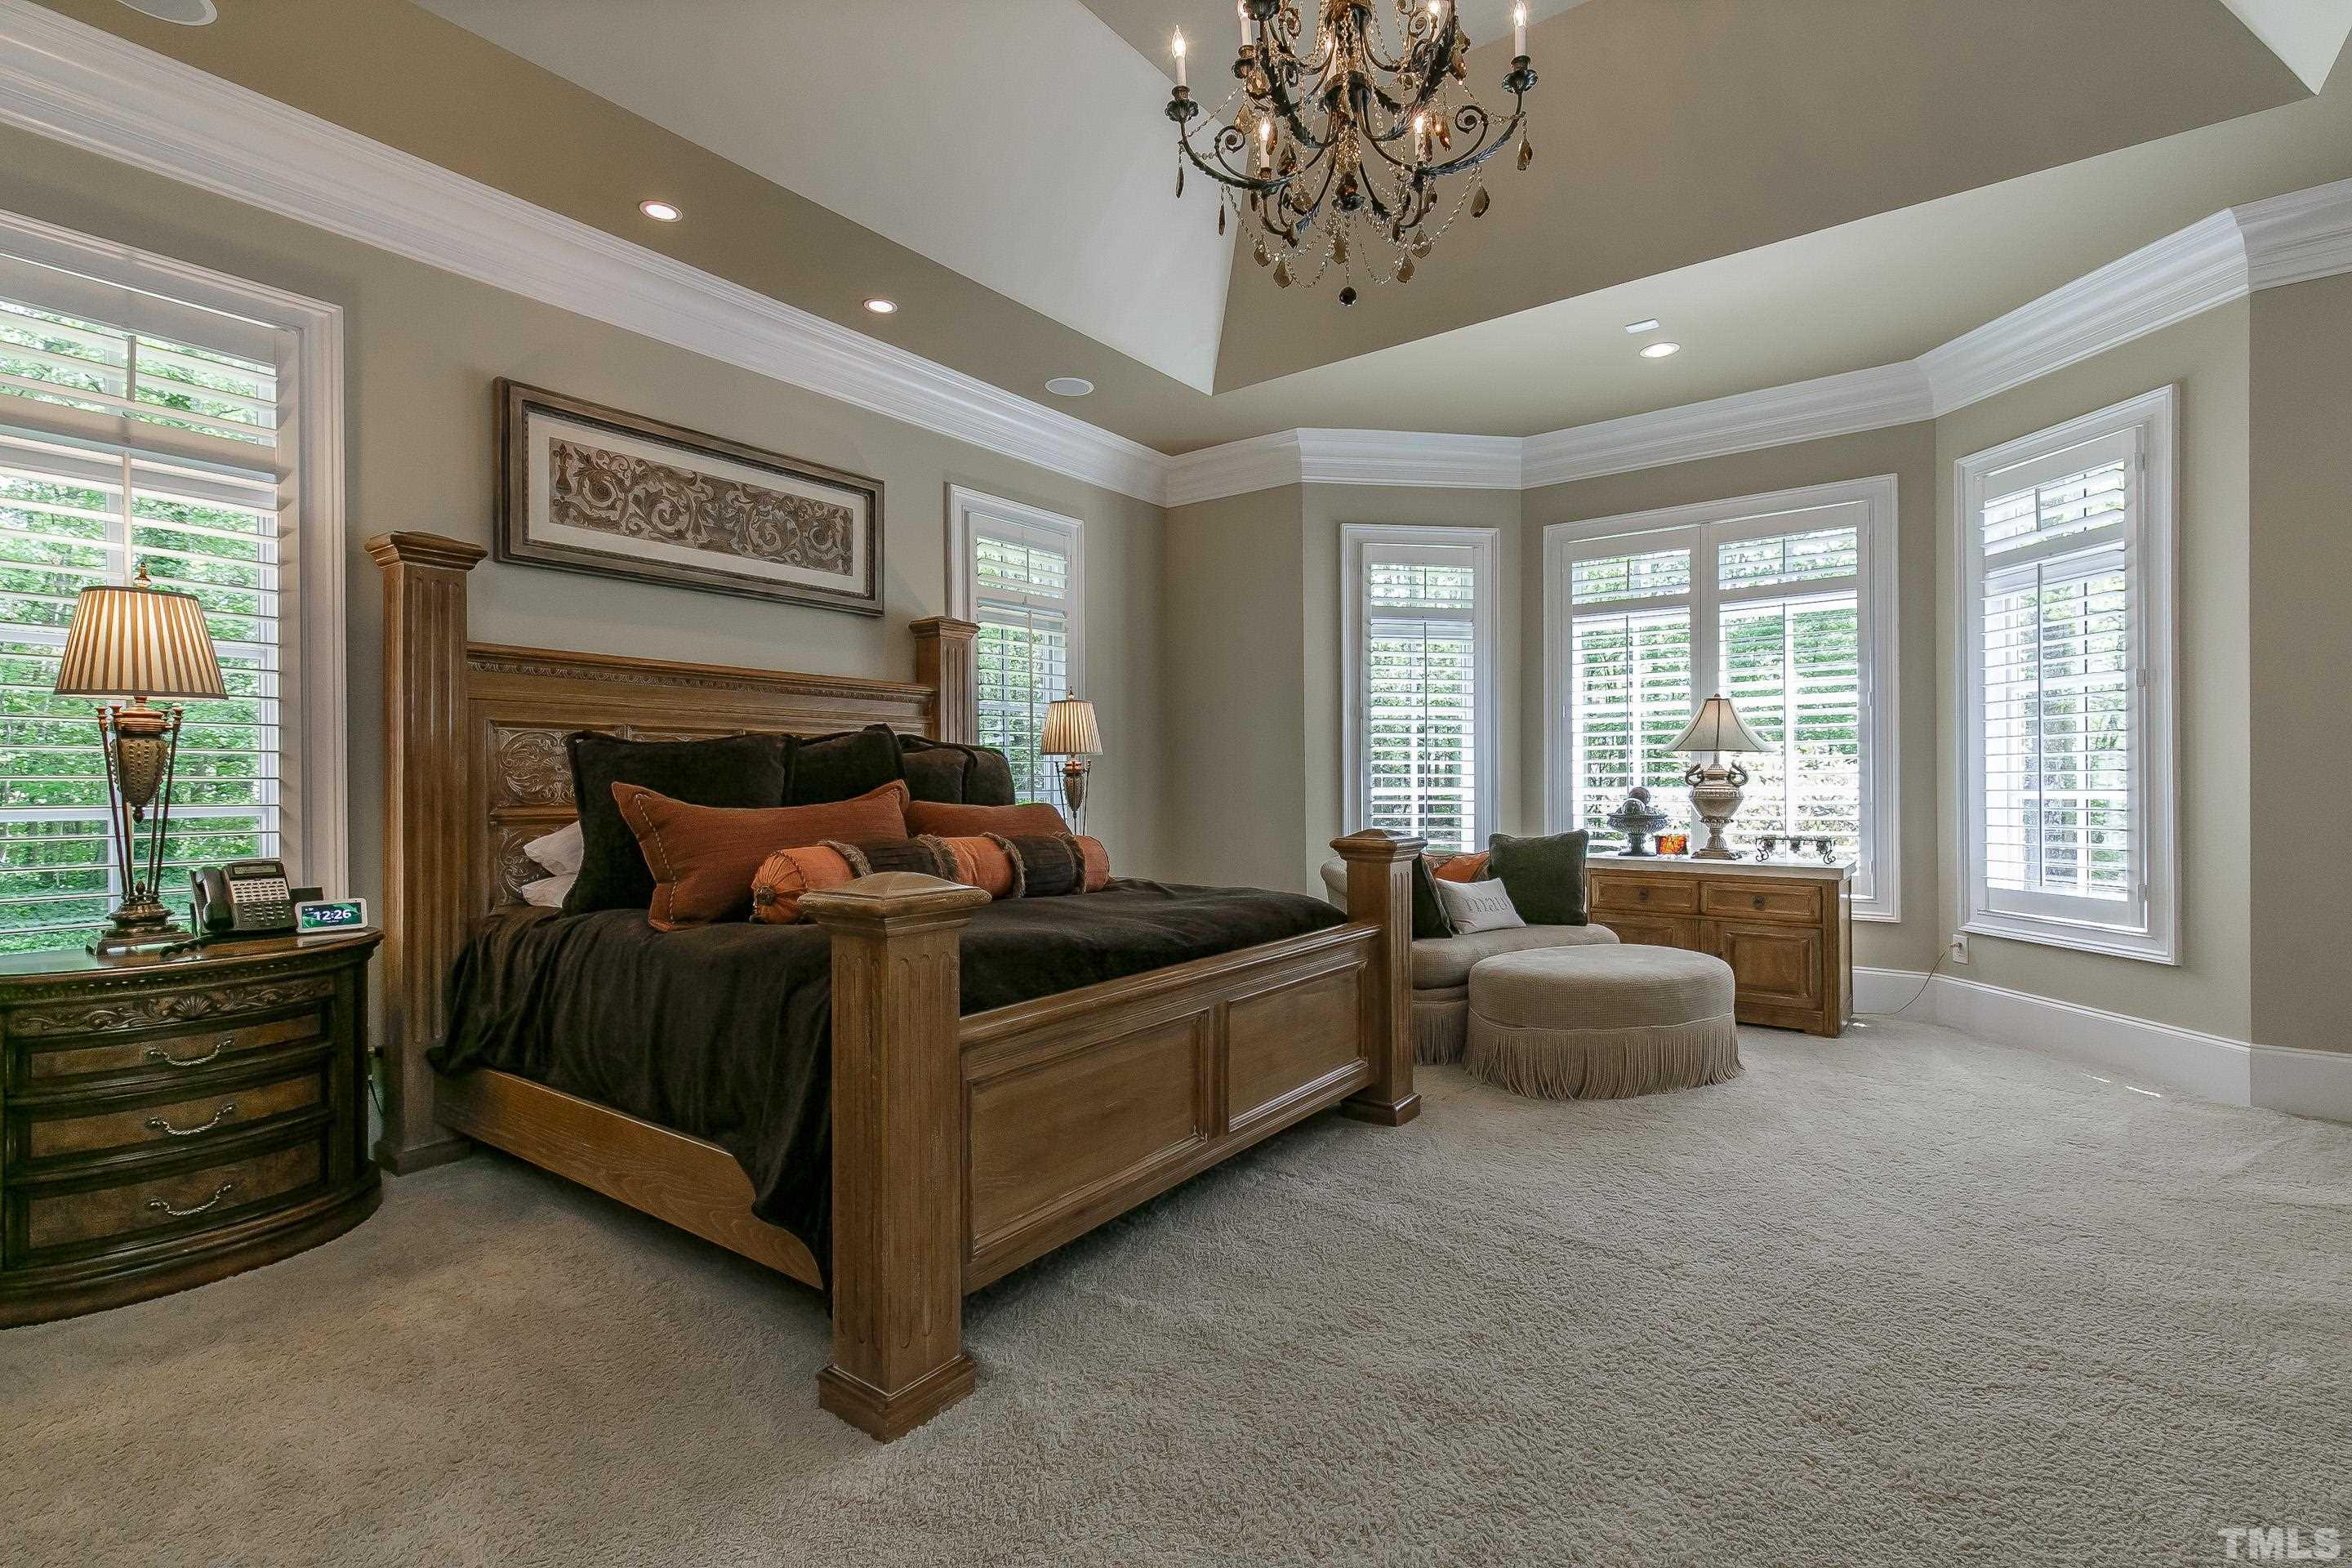 GRAND trey ceiling, heavy moldings, bay window, carpet and recessed lights in this ELEGANT master suite